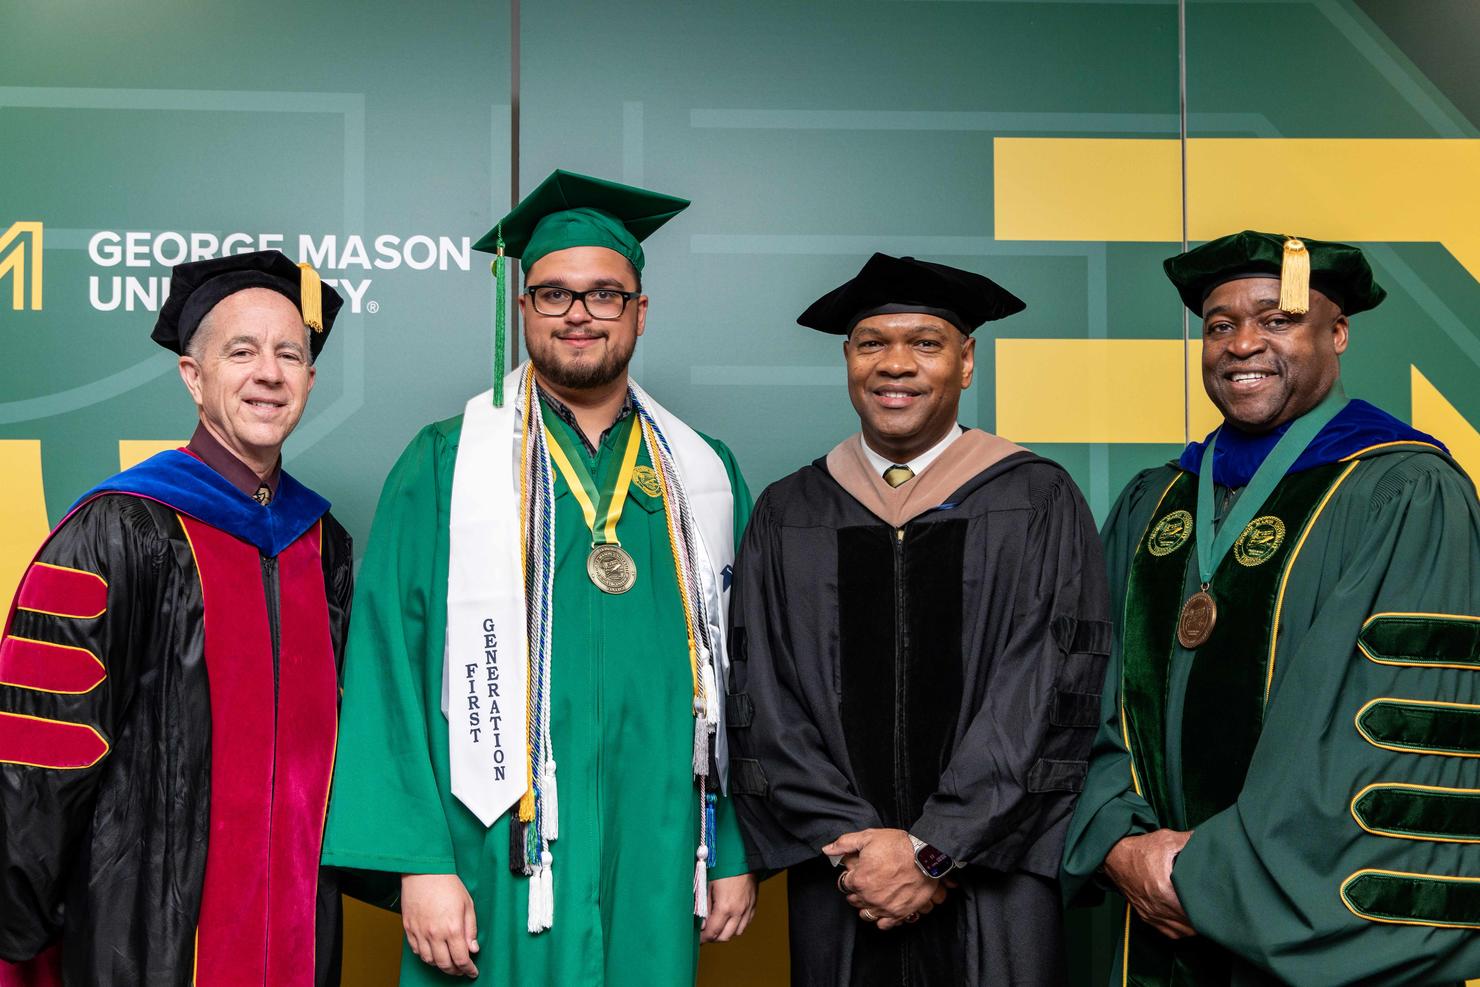 George Mason Provost, student Commencement speaker, Rector, and President stand together and smile